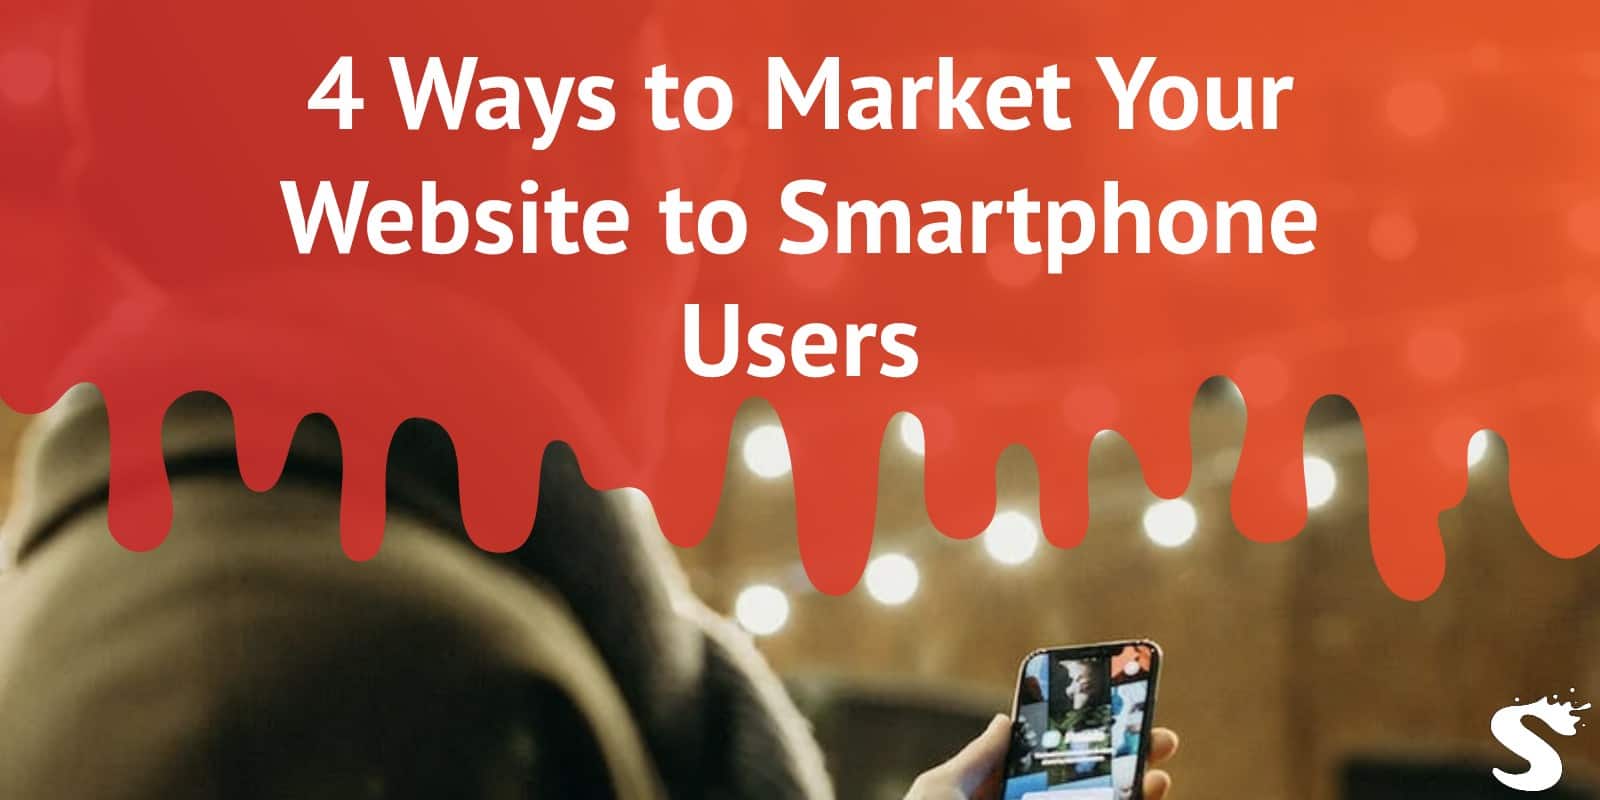 4 Ways to Market Your Website to Smartphone Users